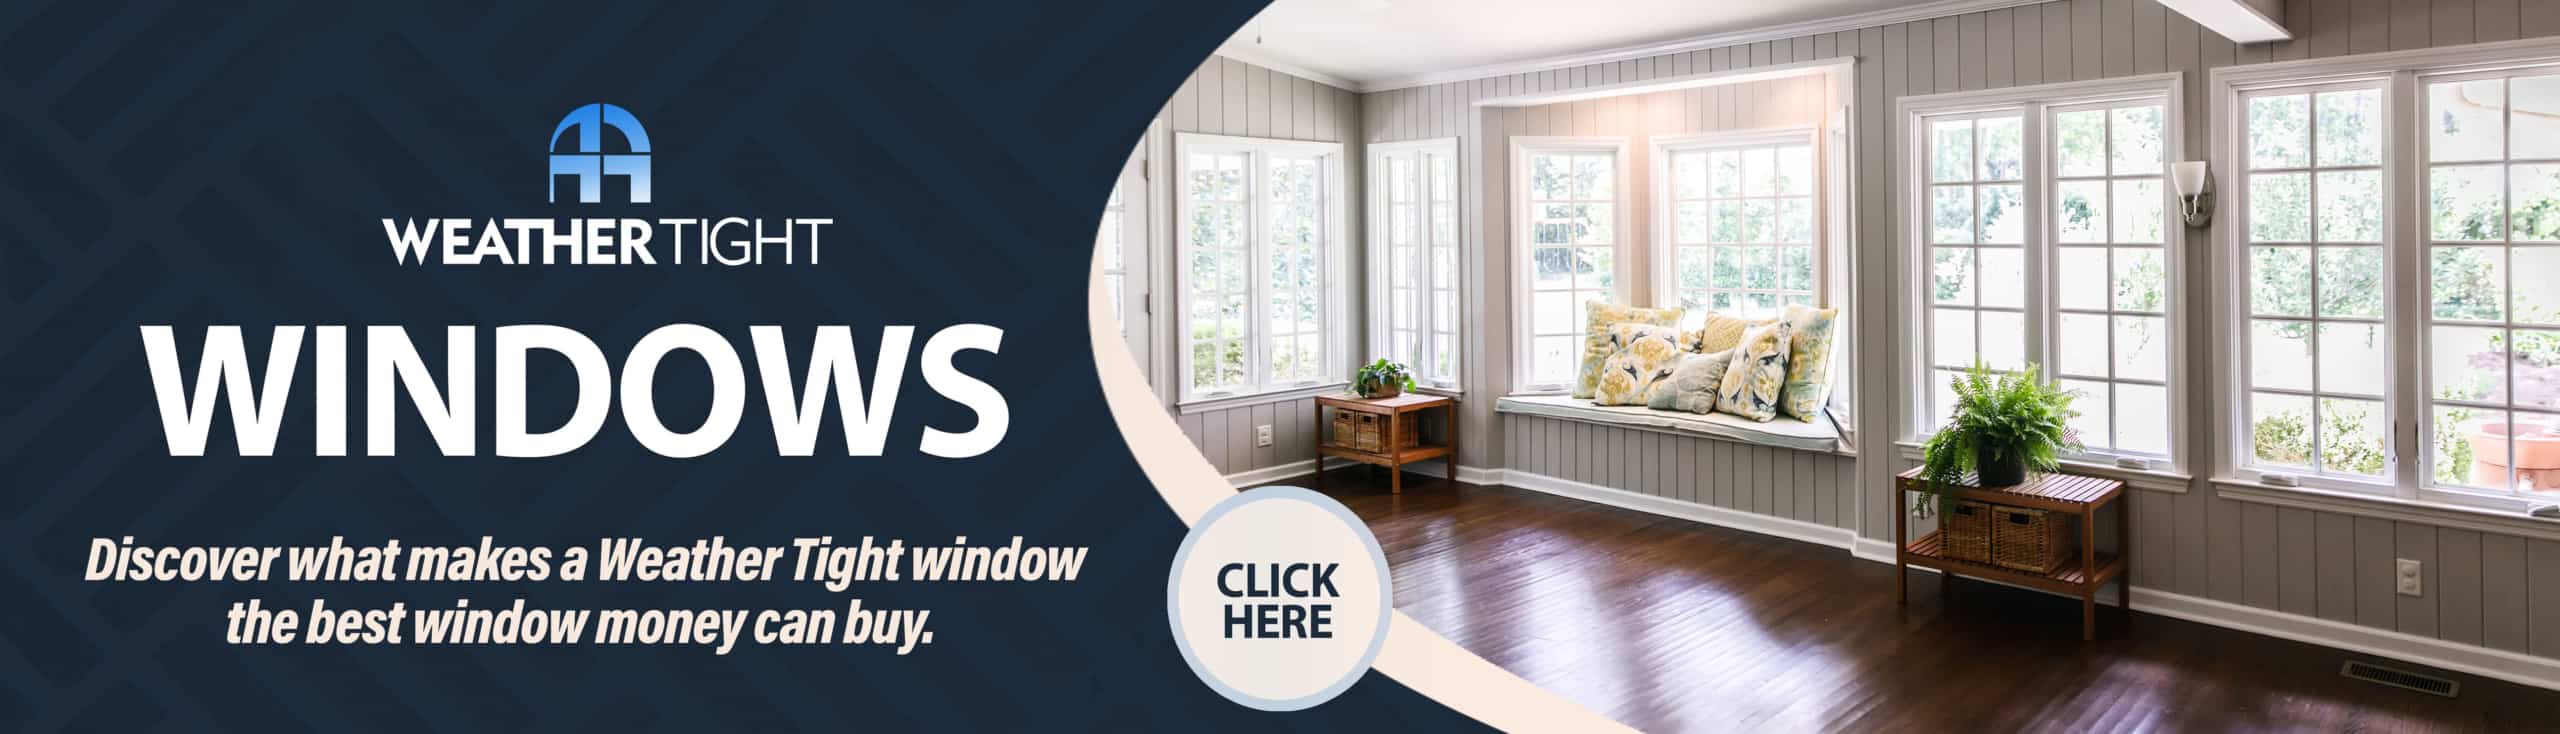 Weather Tight Windows-Discover what makes a Weather Tight window the best window money can buy